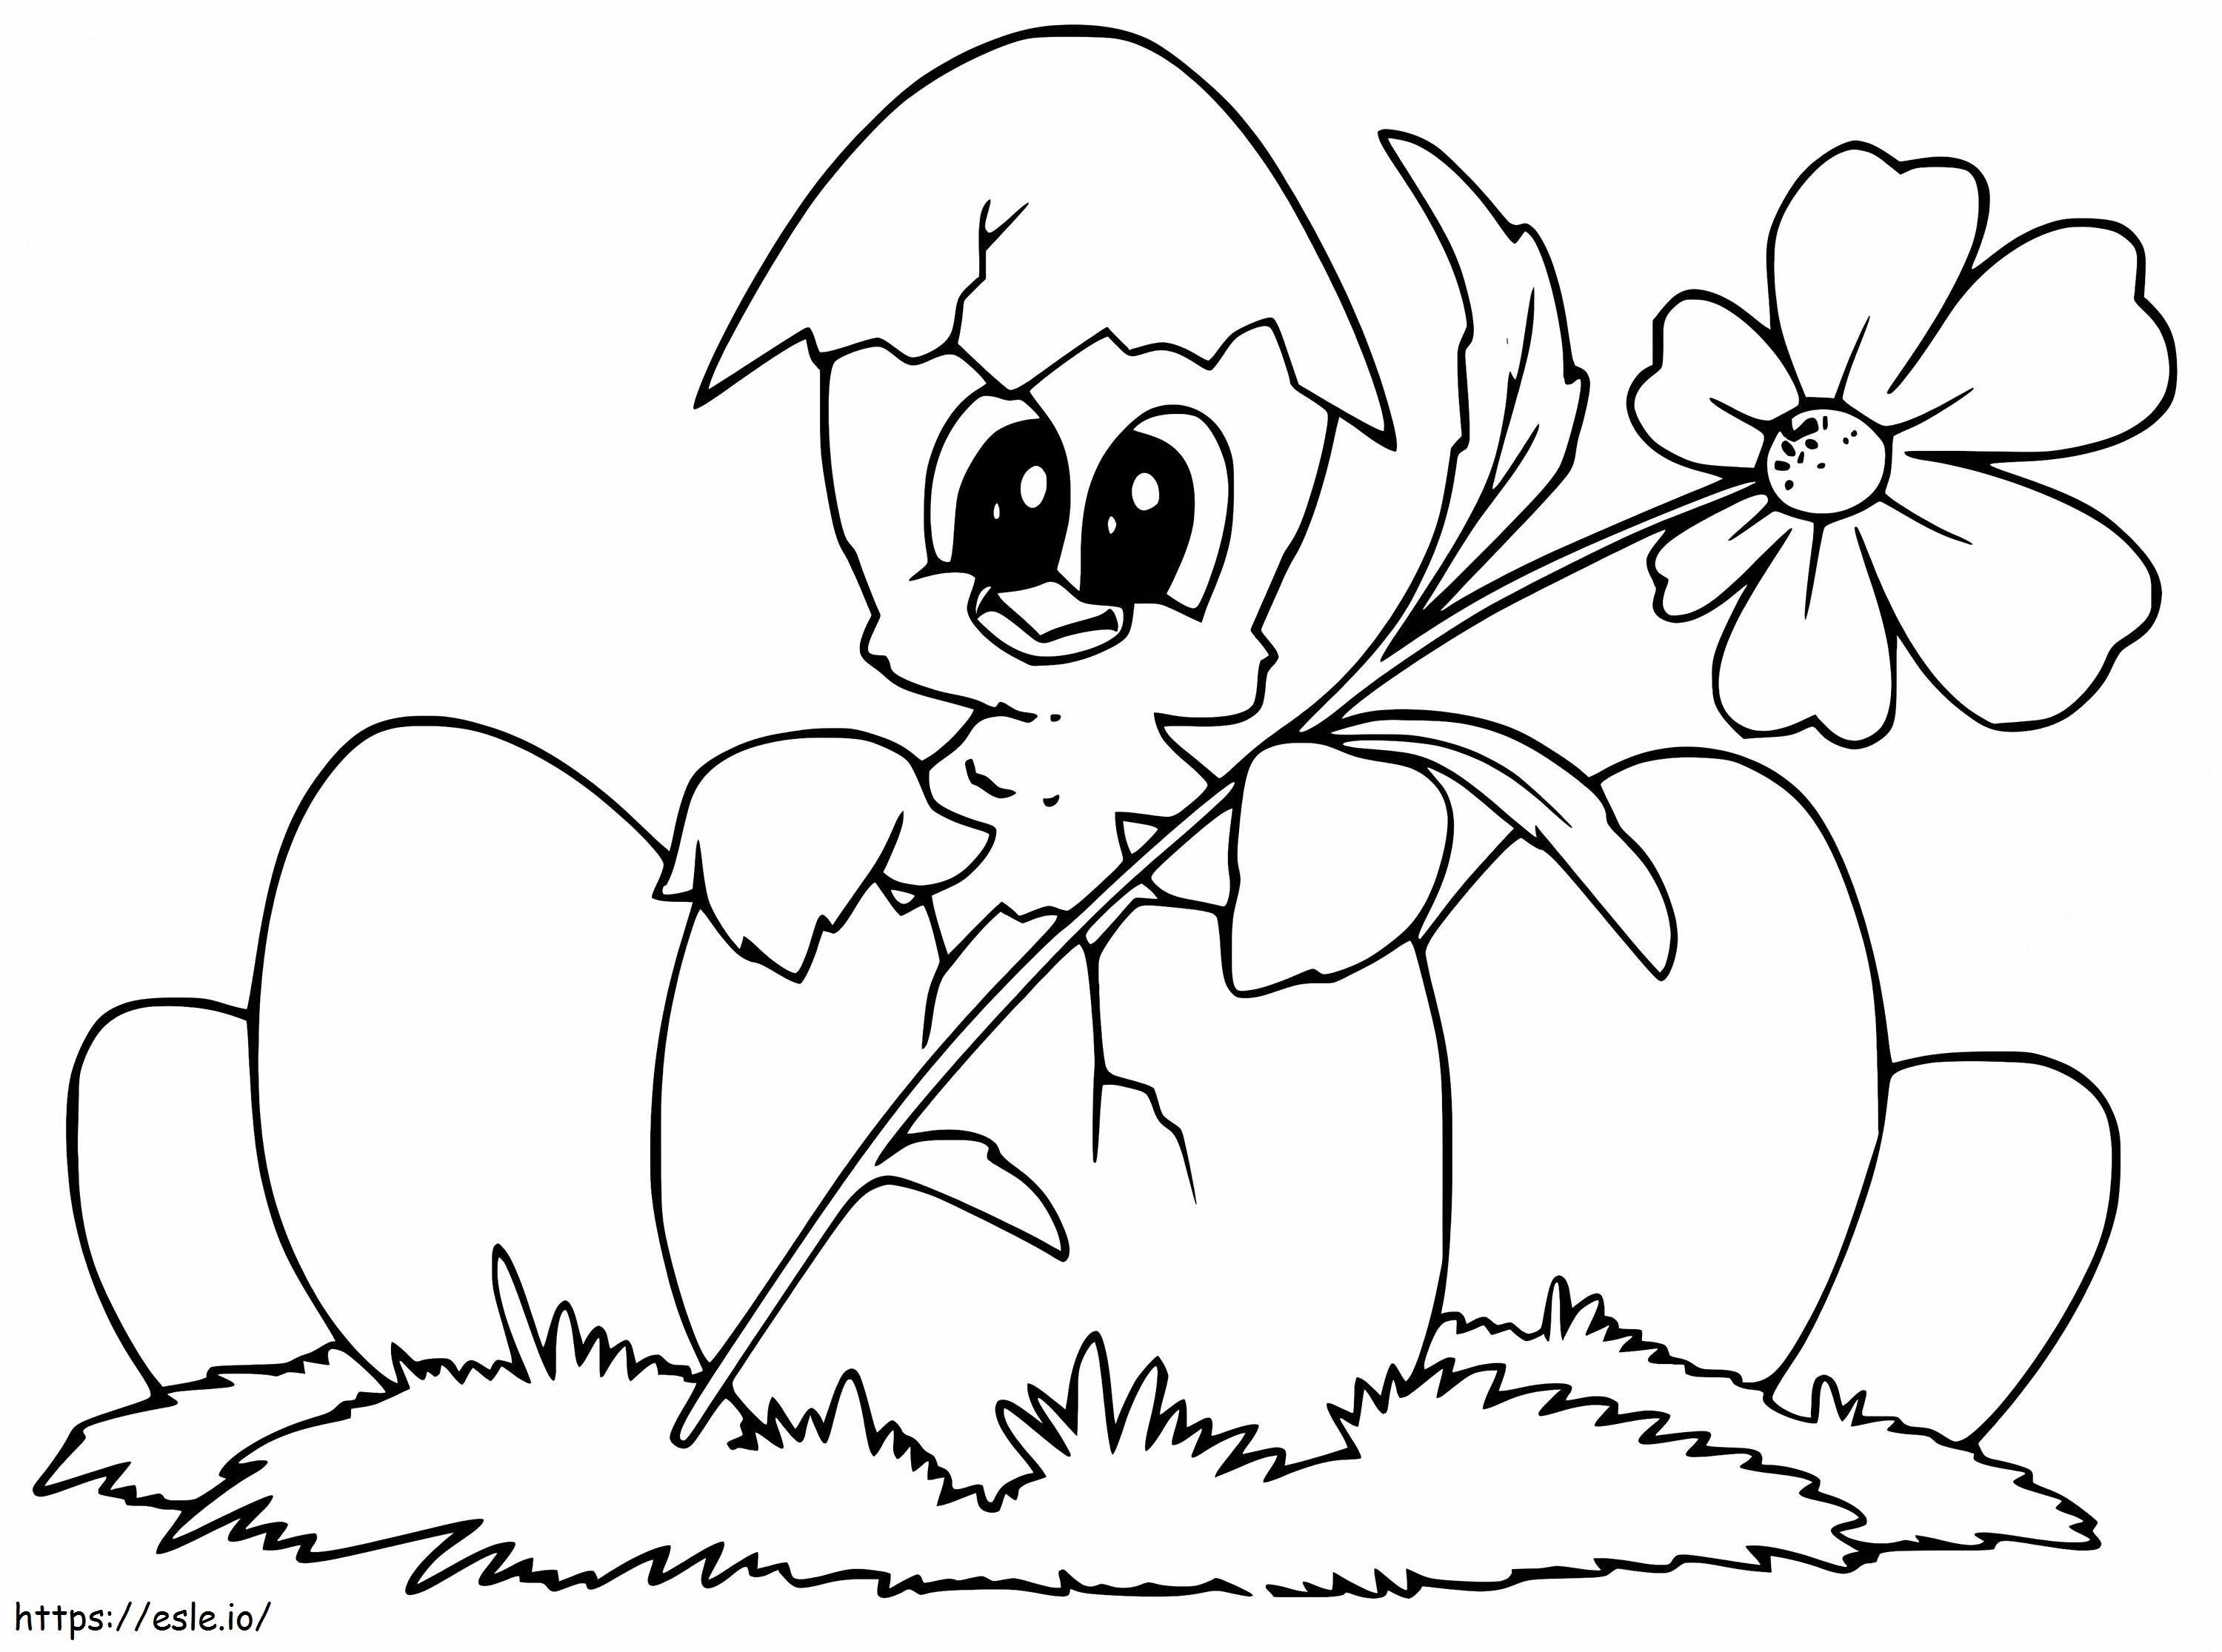 Print Easter Chick coloring page